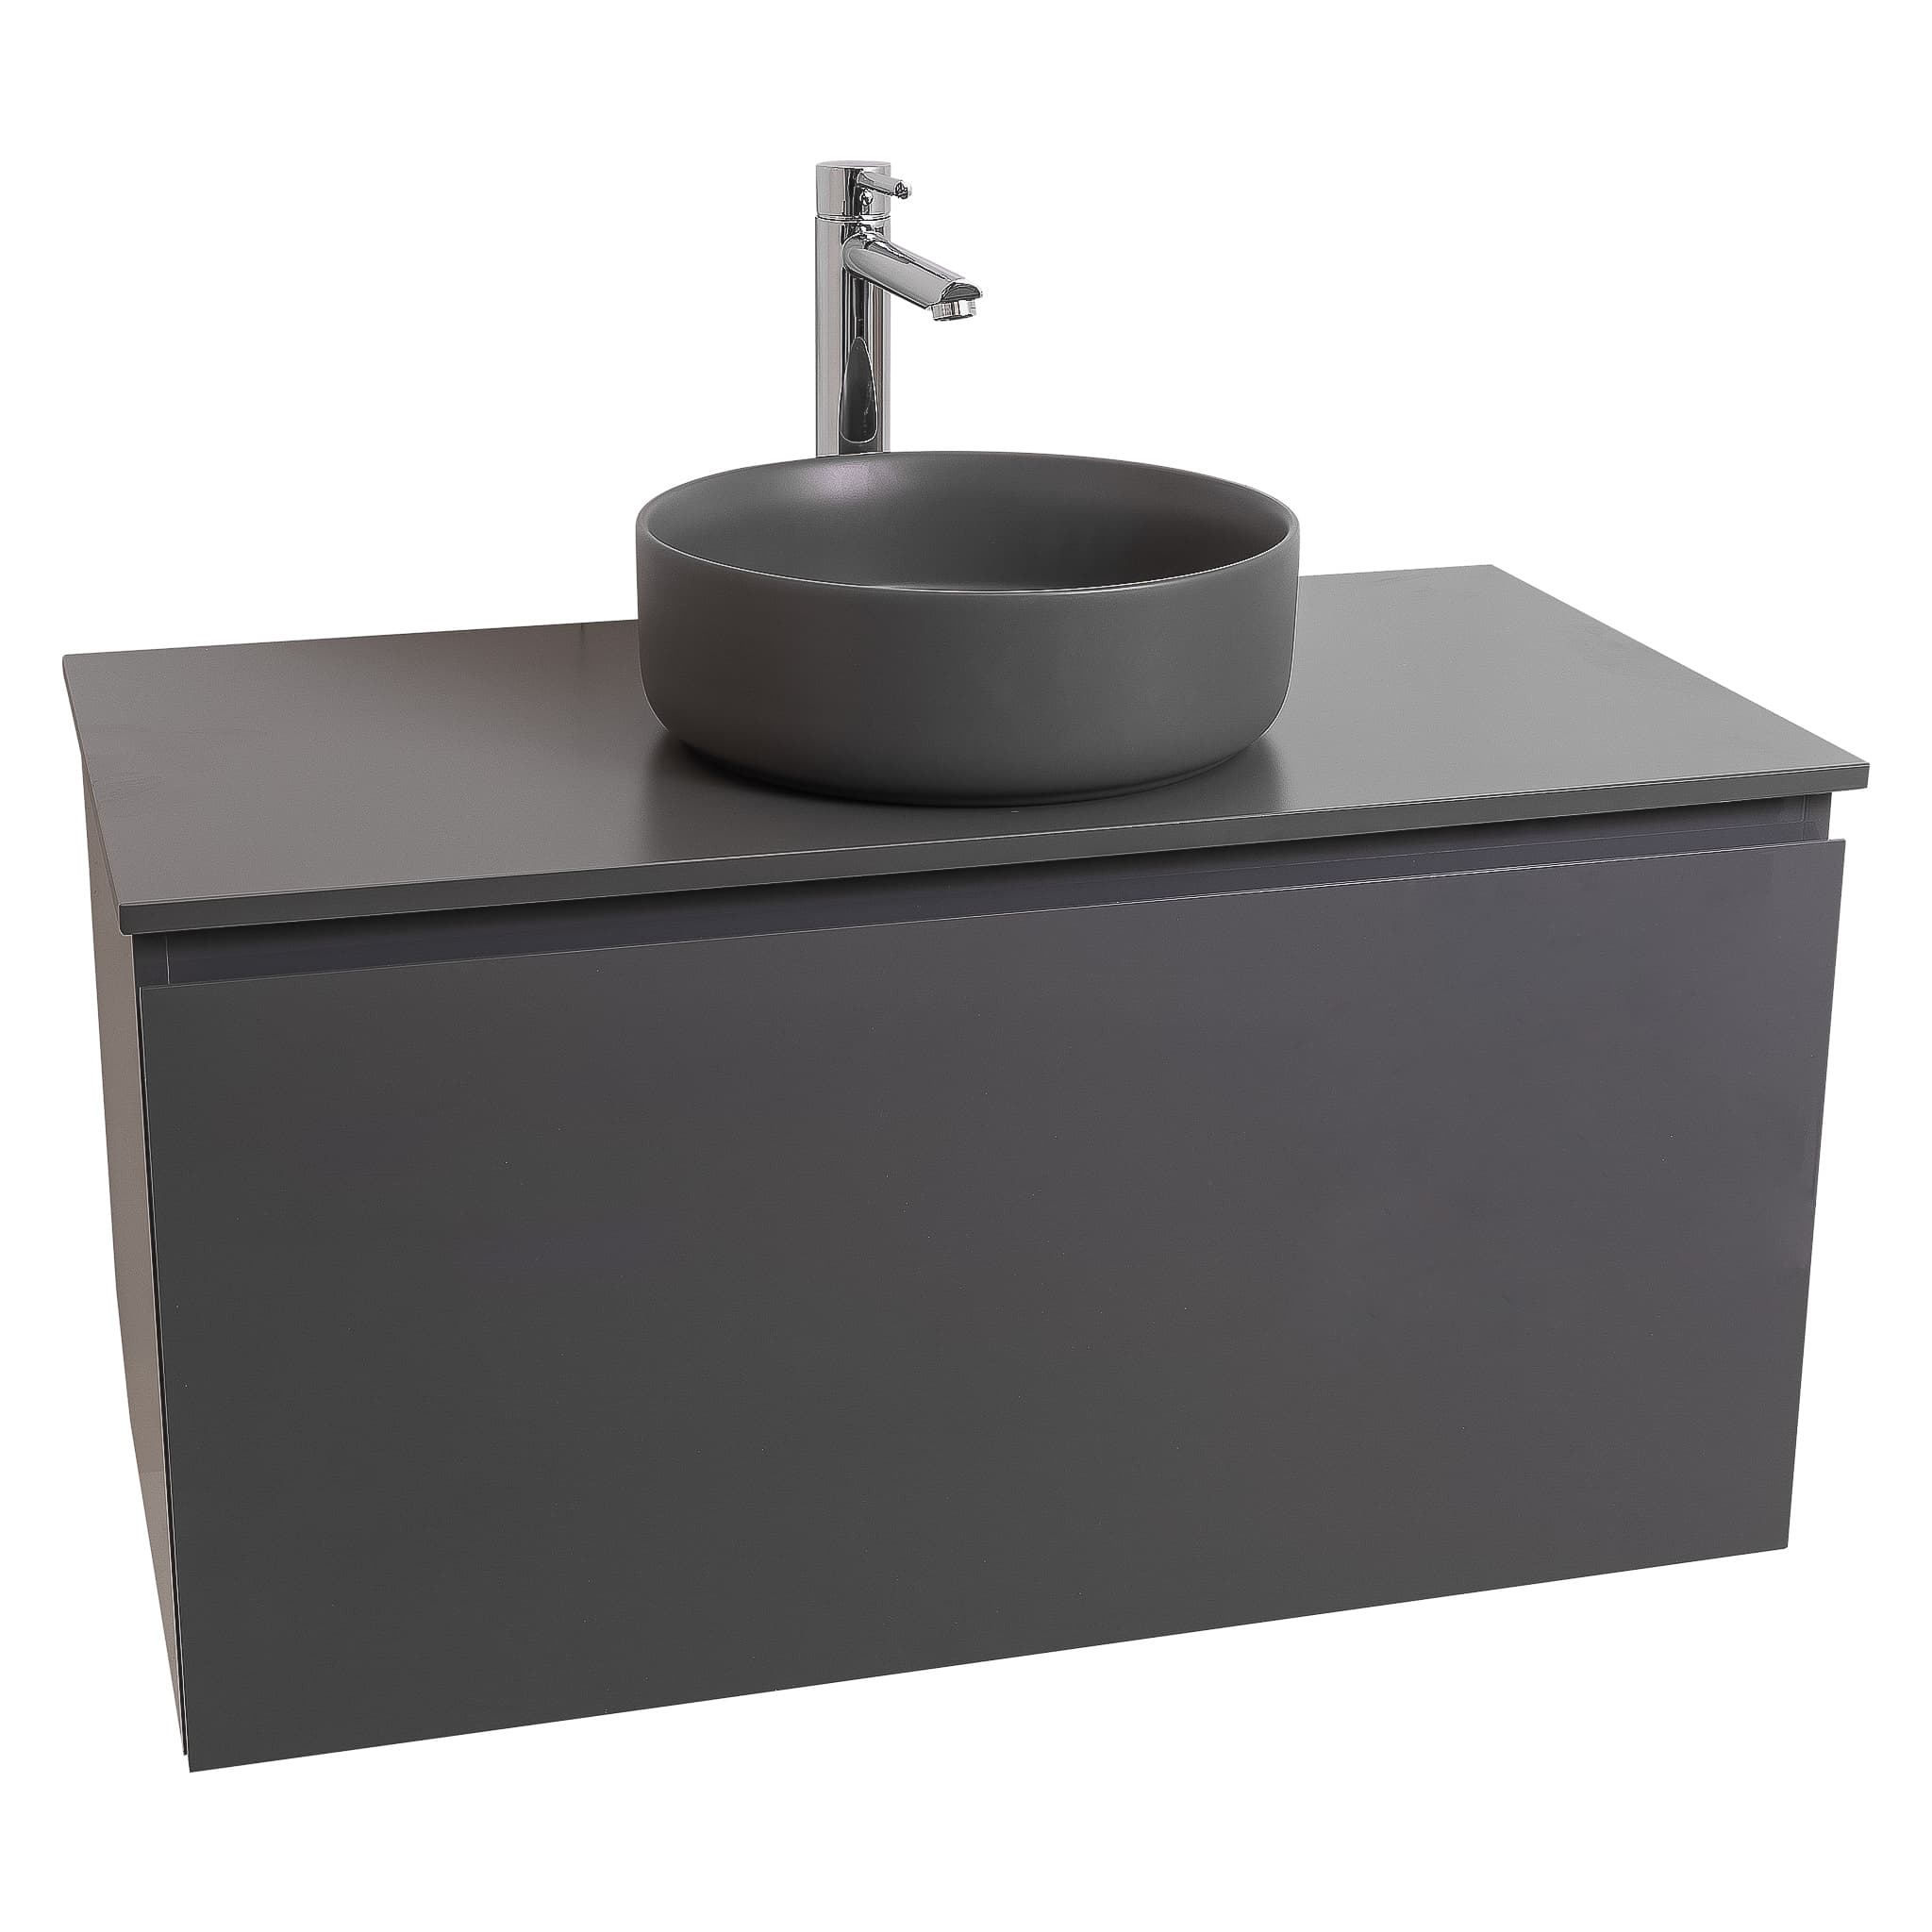 Venice 31.5 Anthracite High Gloss Cabinet, Ares Grey Ceniza Top And Ares Grey Ceniza Ceramic Basin, Wall Mounted Modern Vanity Set